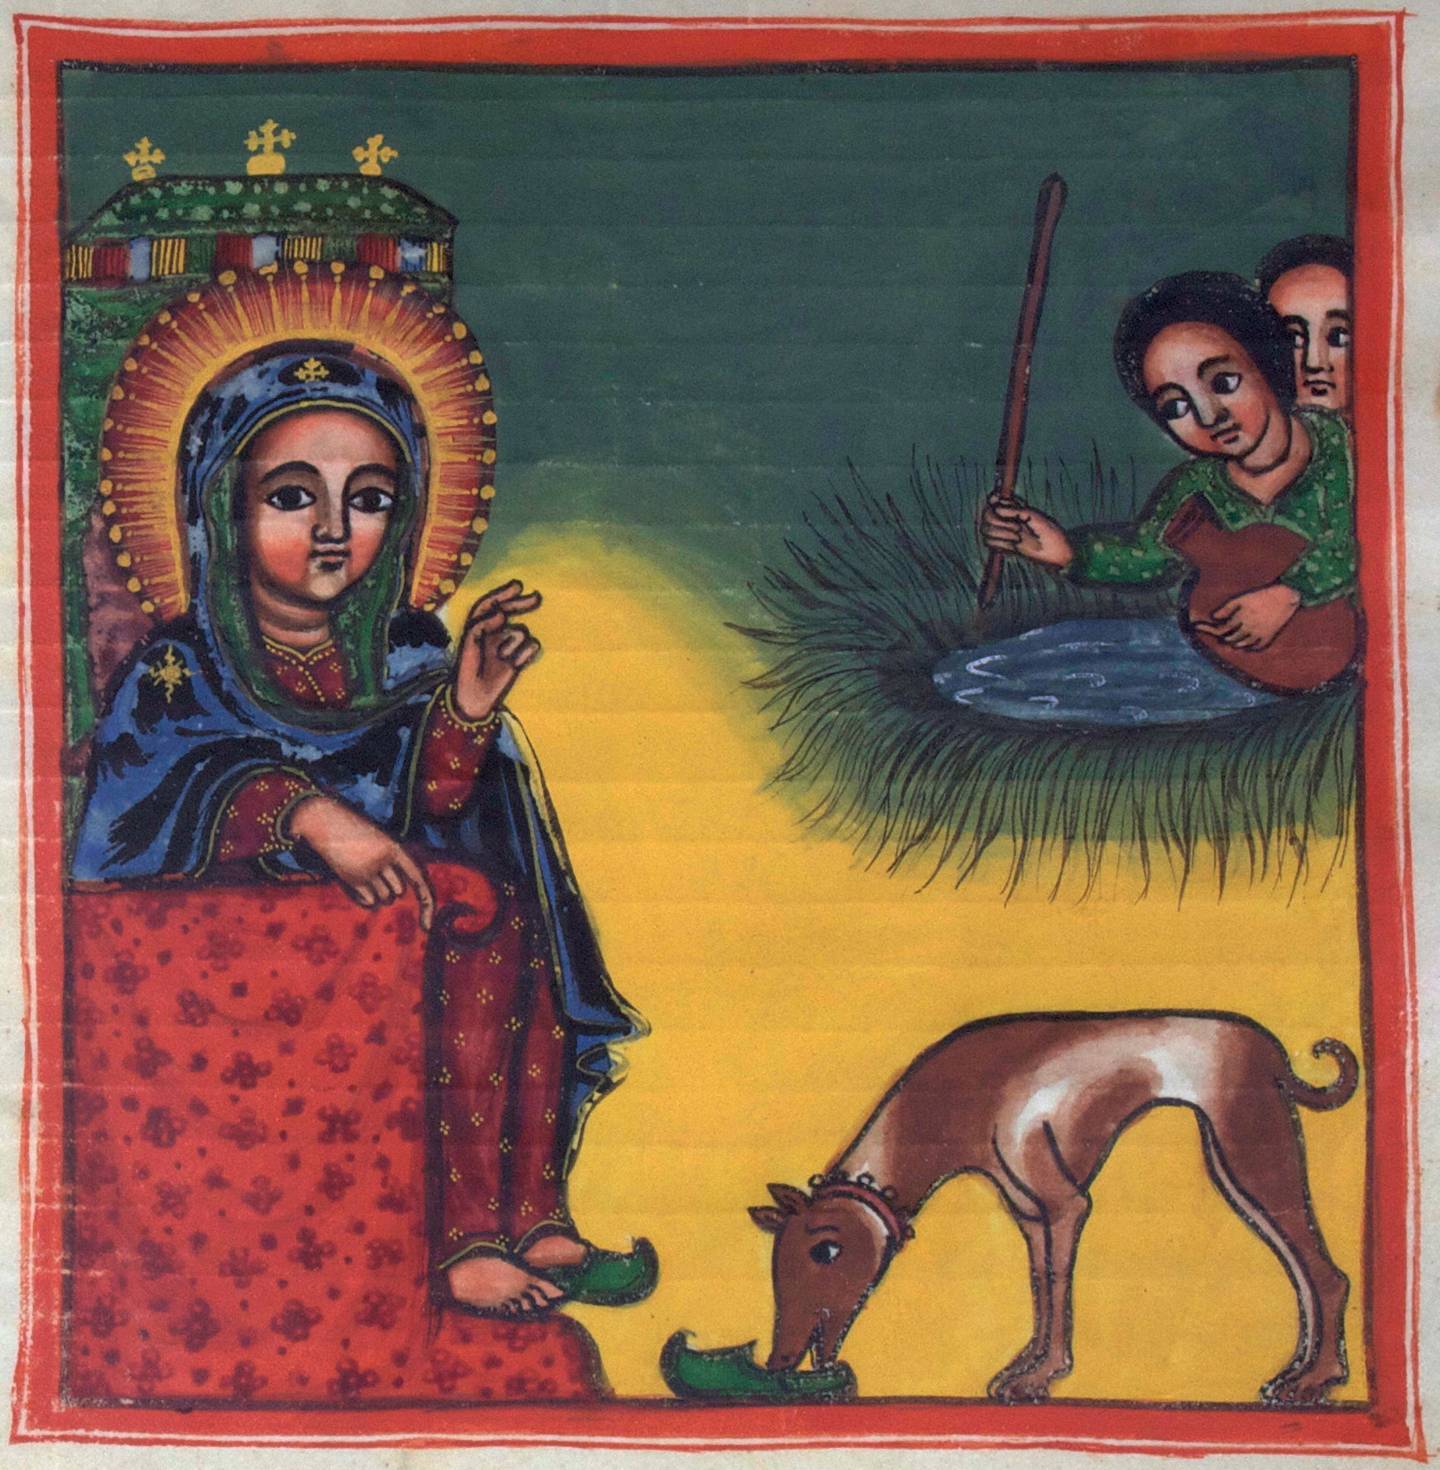 Painting of Saint Mary giving a thirsty dog water to drink from her shoe.